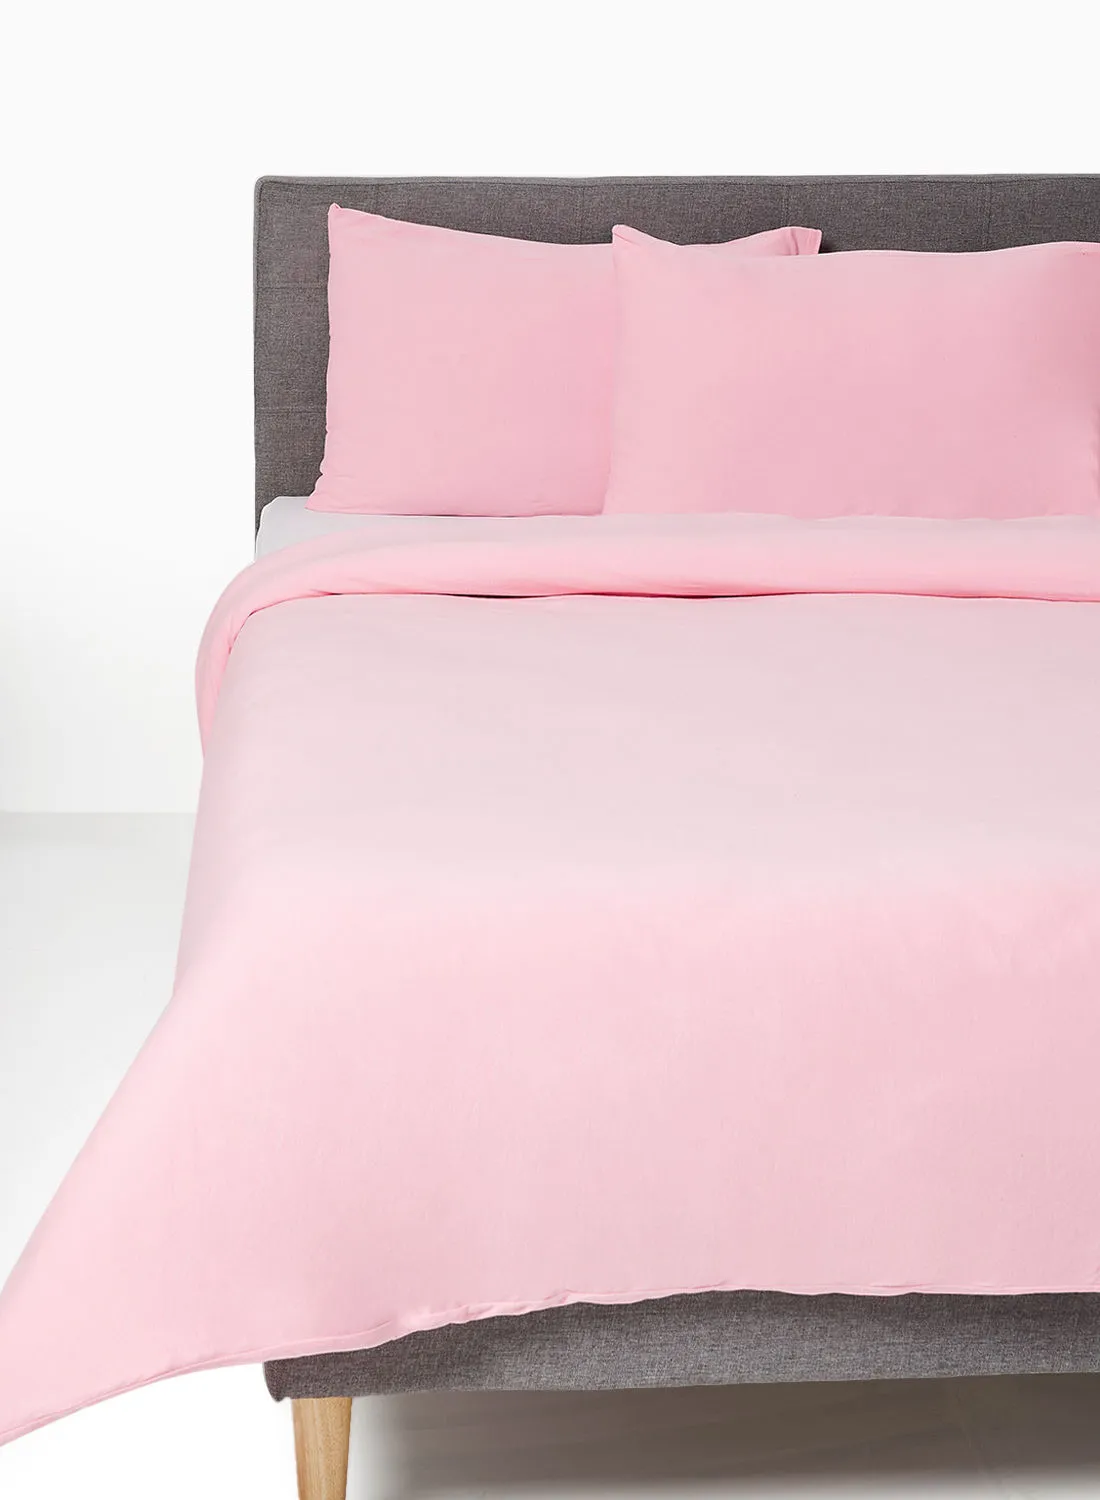 noon east Duvet Cover With Pillow Cover 50X75 Cm, Comforter 160X200 Cm, - For Queen Size Mattress - Pink 100% Cotton 140 GSM